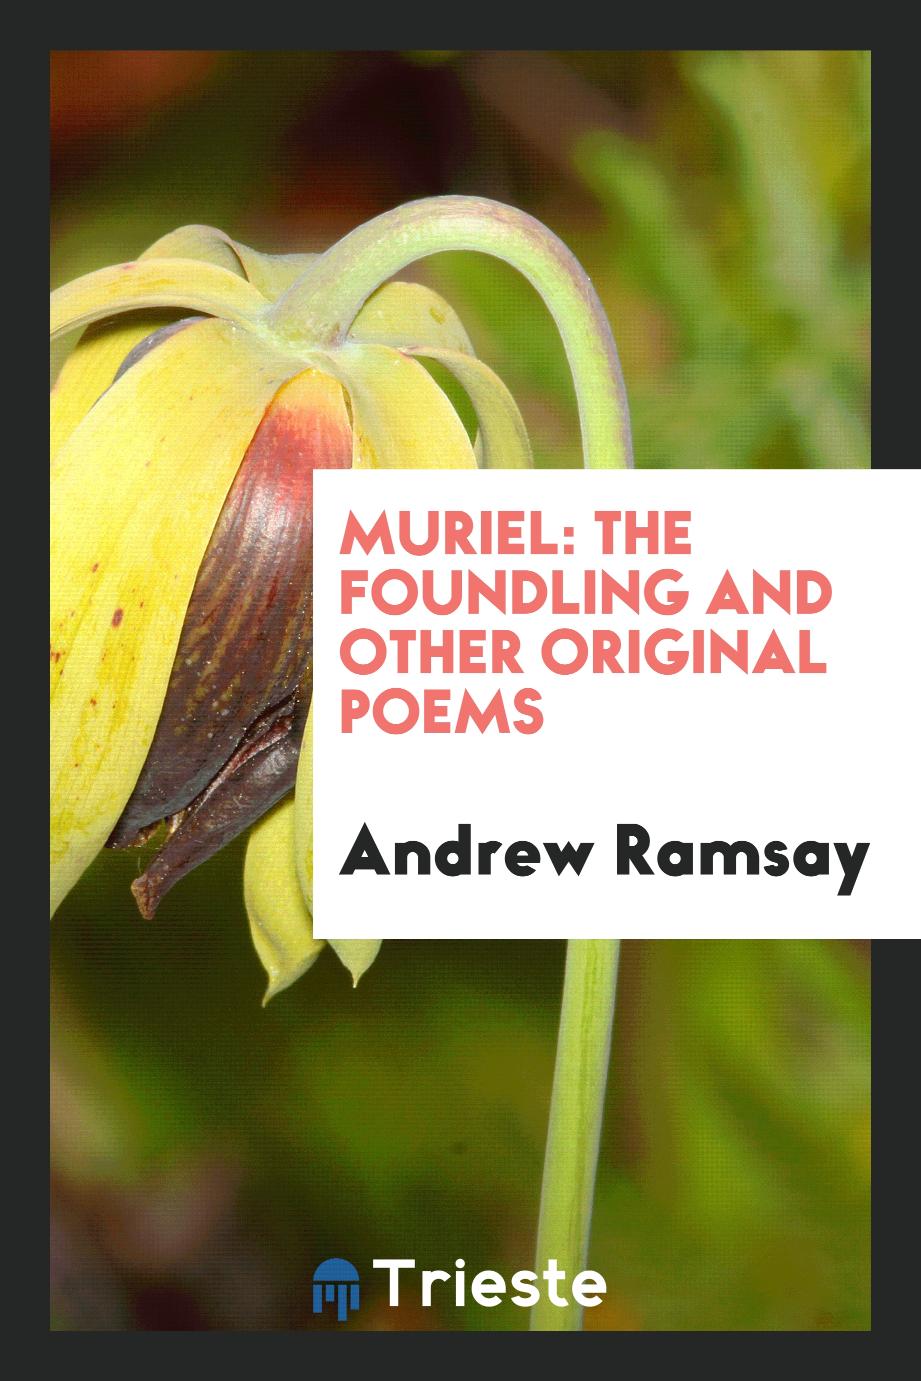 Muriel: The Foundling and Other Original Poems